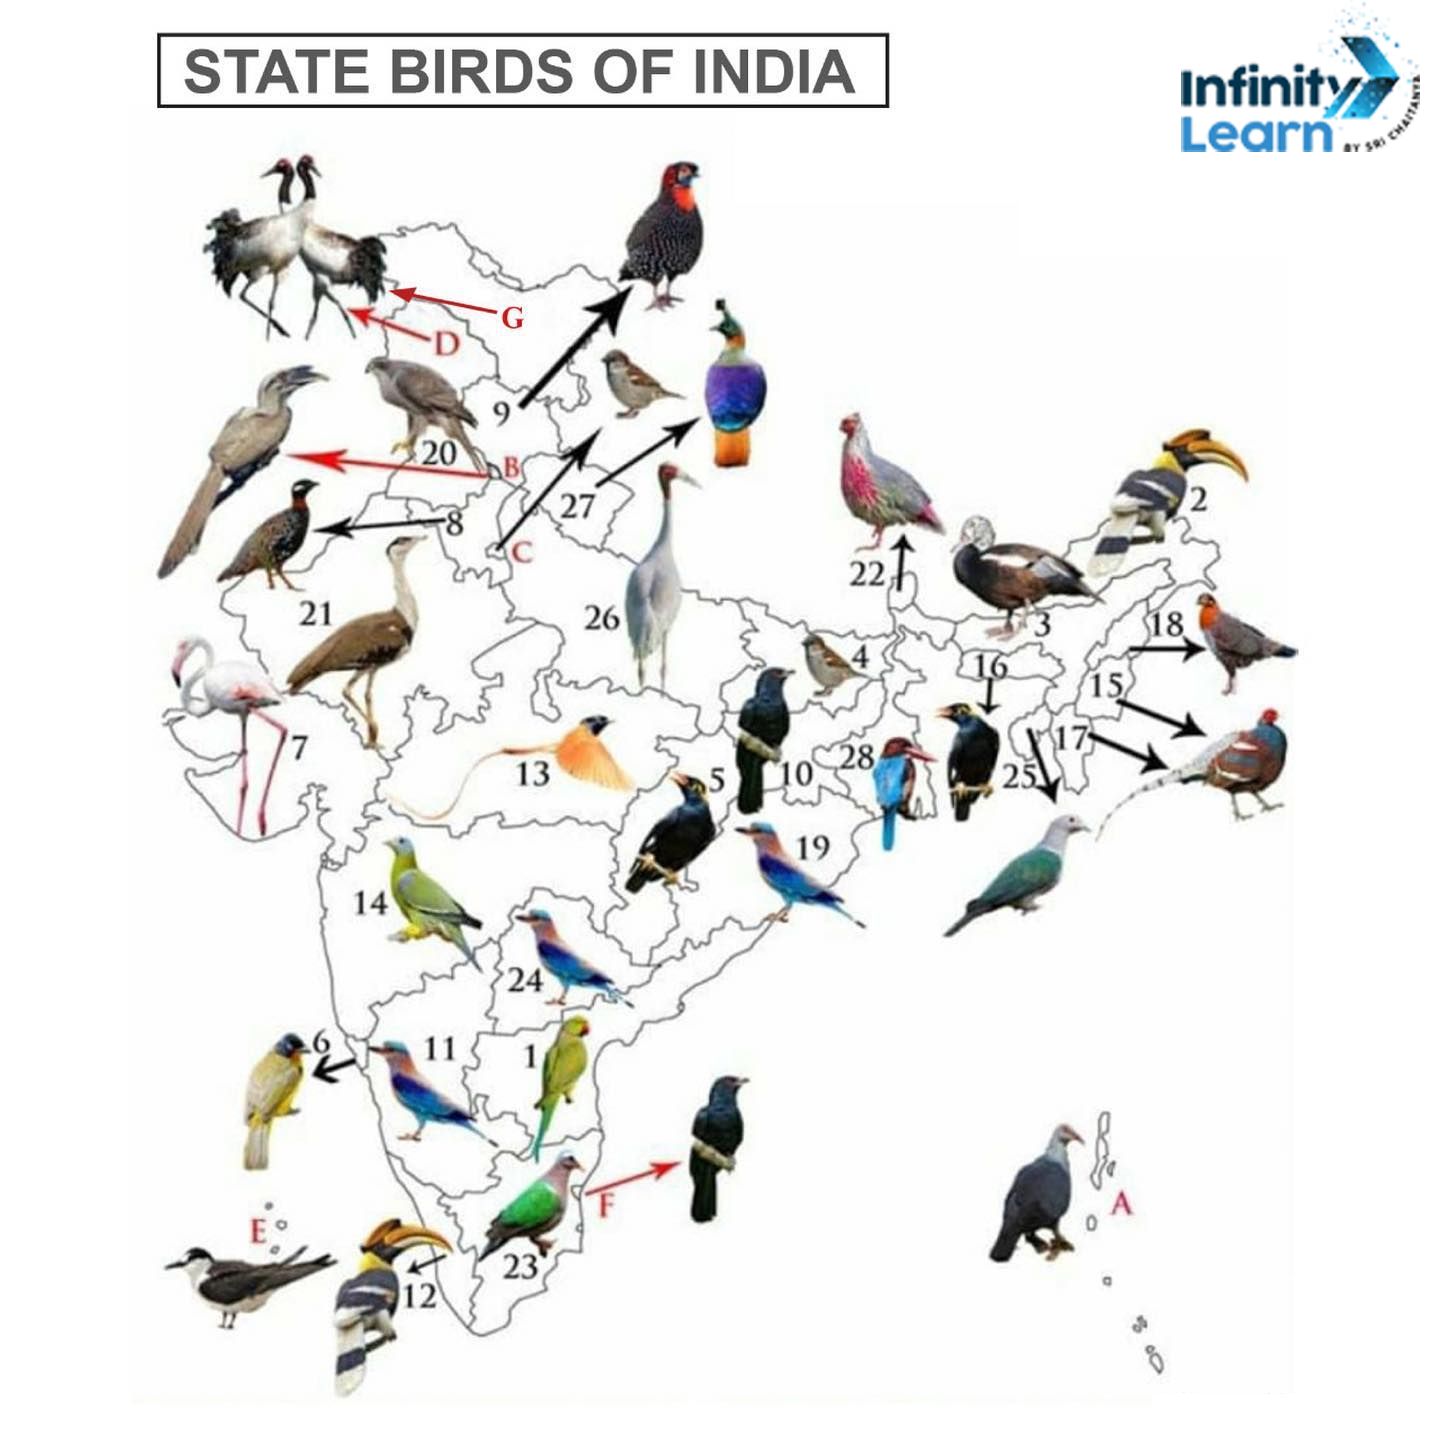 State Birds of India Map